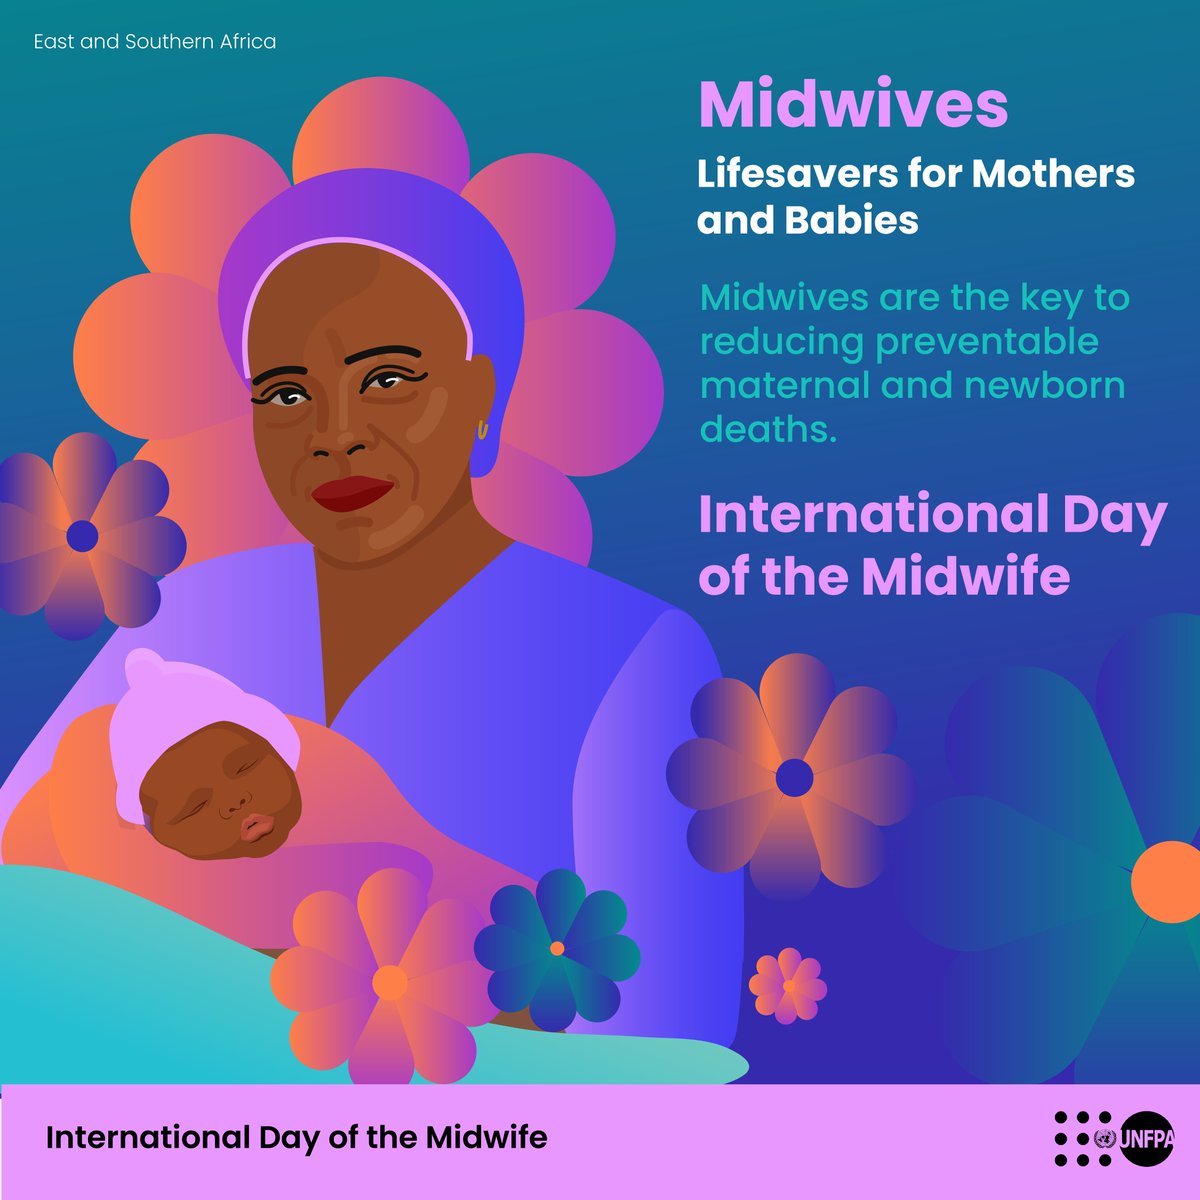 In East and Southern Africa, midwives are the backbone of healthcare, providing 90% of vital services. Let's celebrate their dedication! #MidwivesCare #HealthForAll